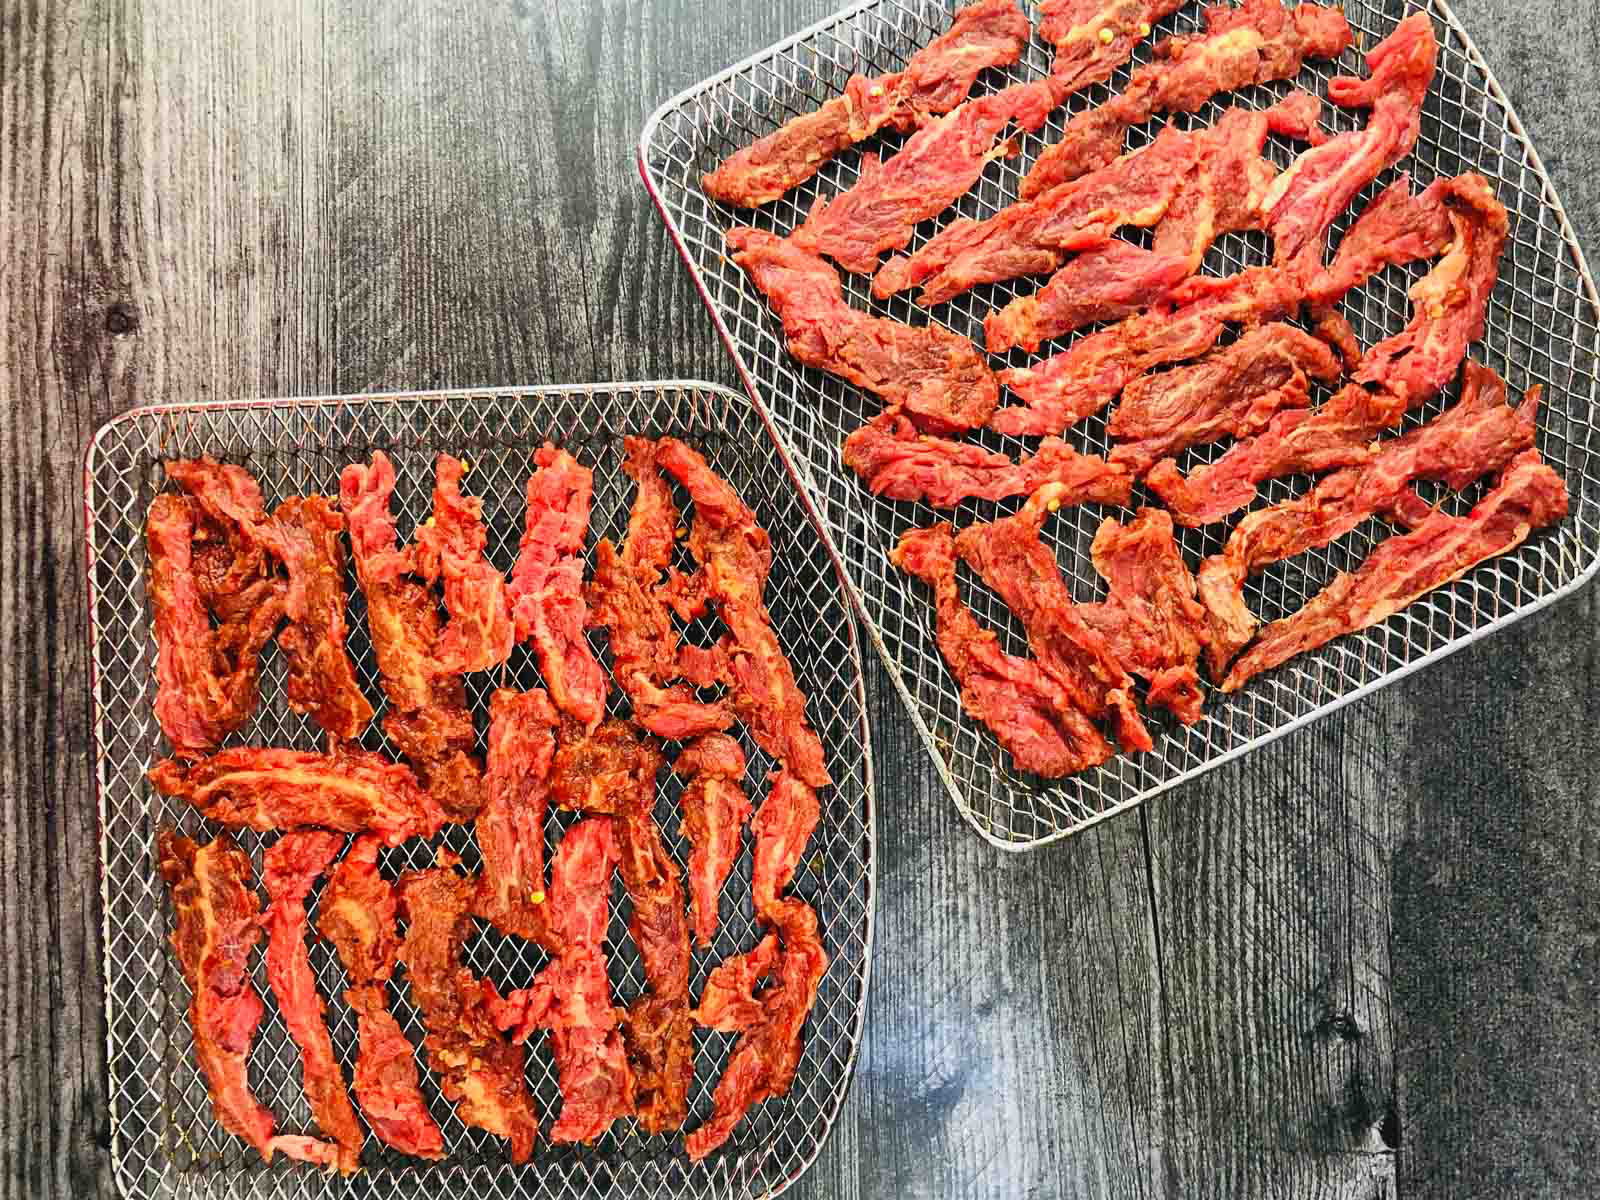 How To Make Beef Jerky In An Air Fryer